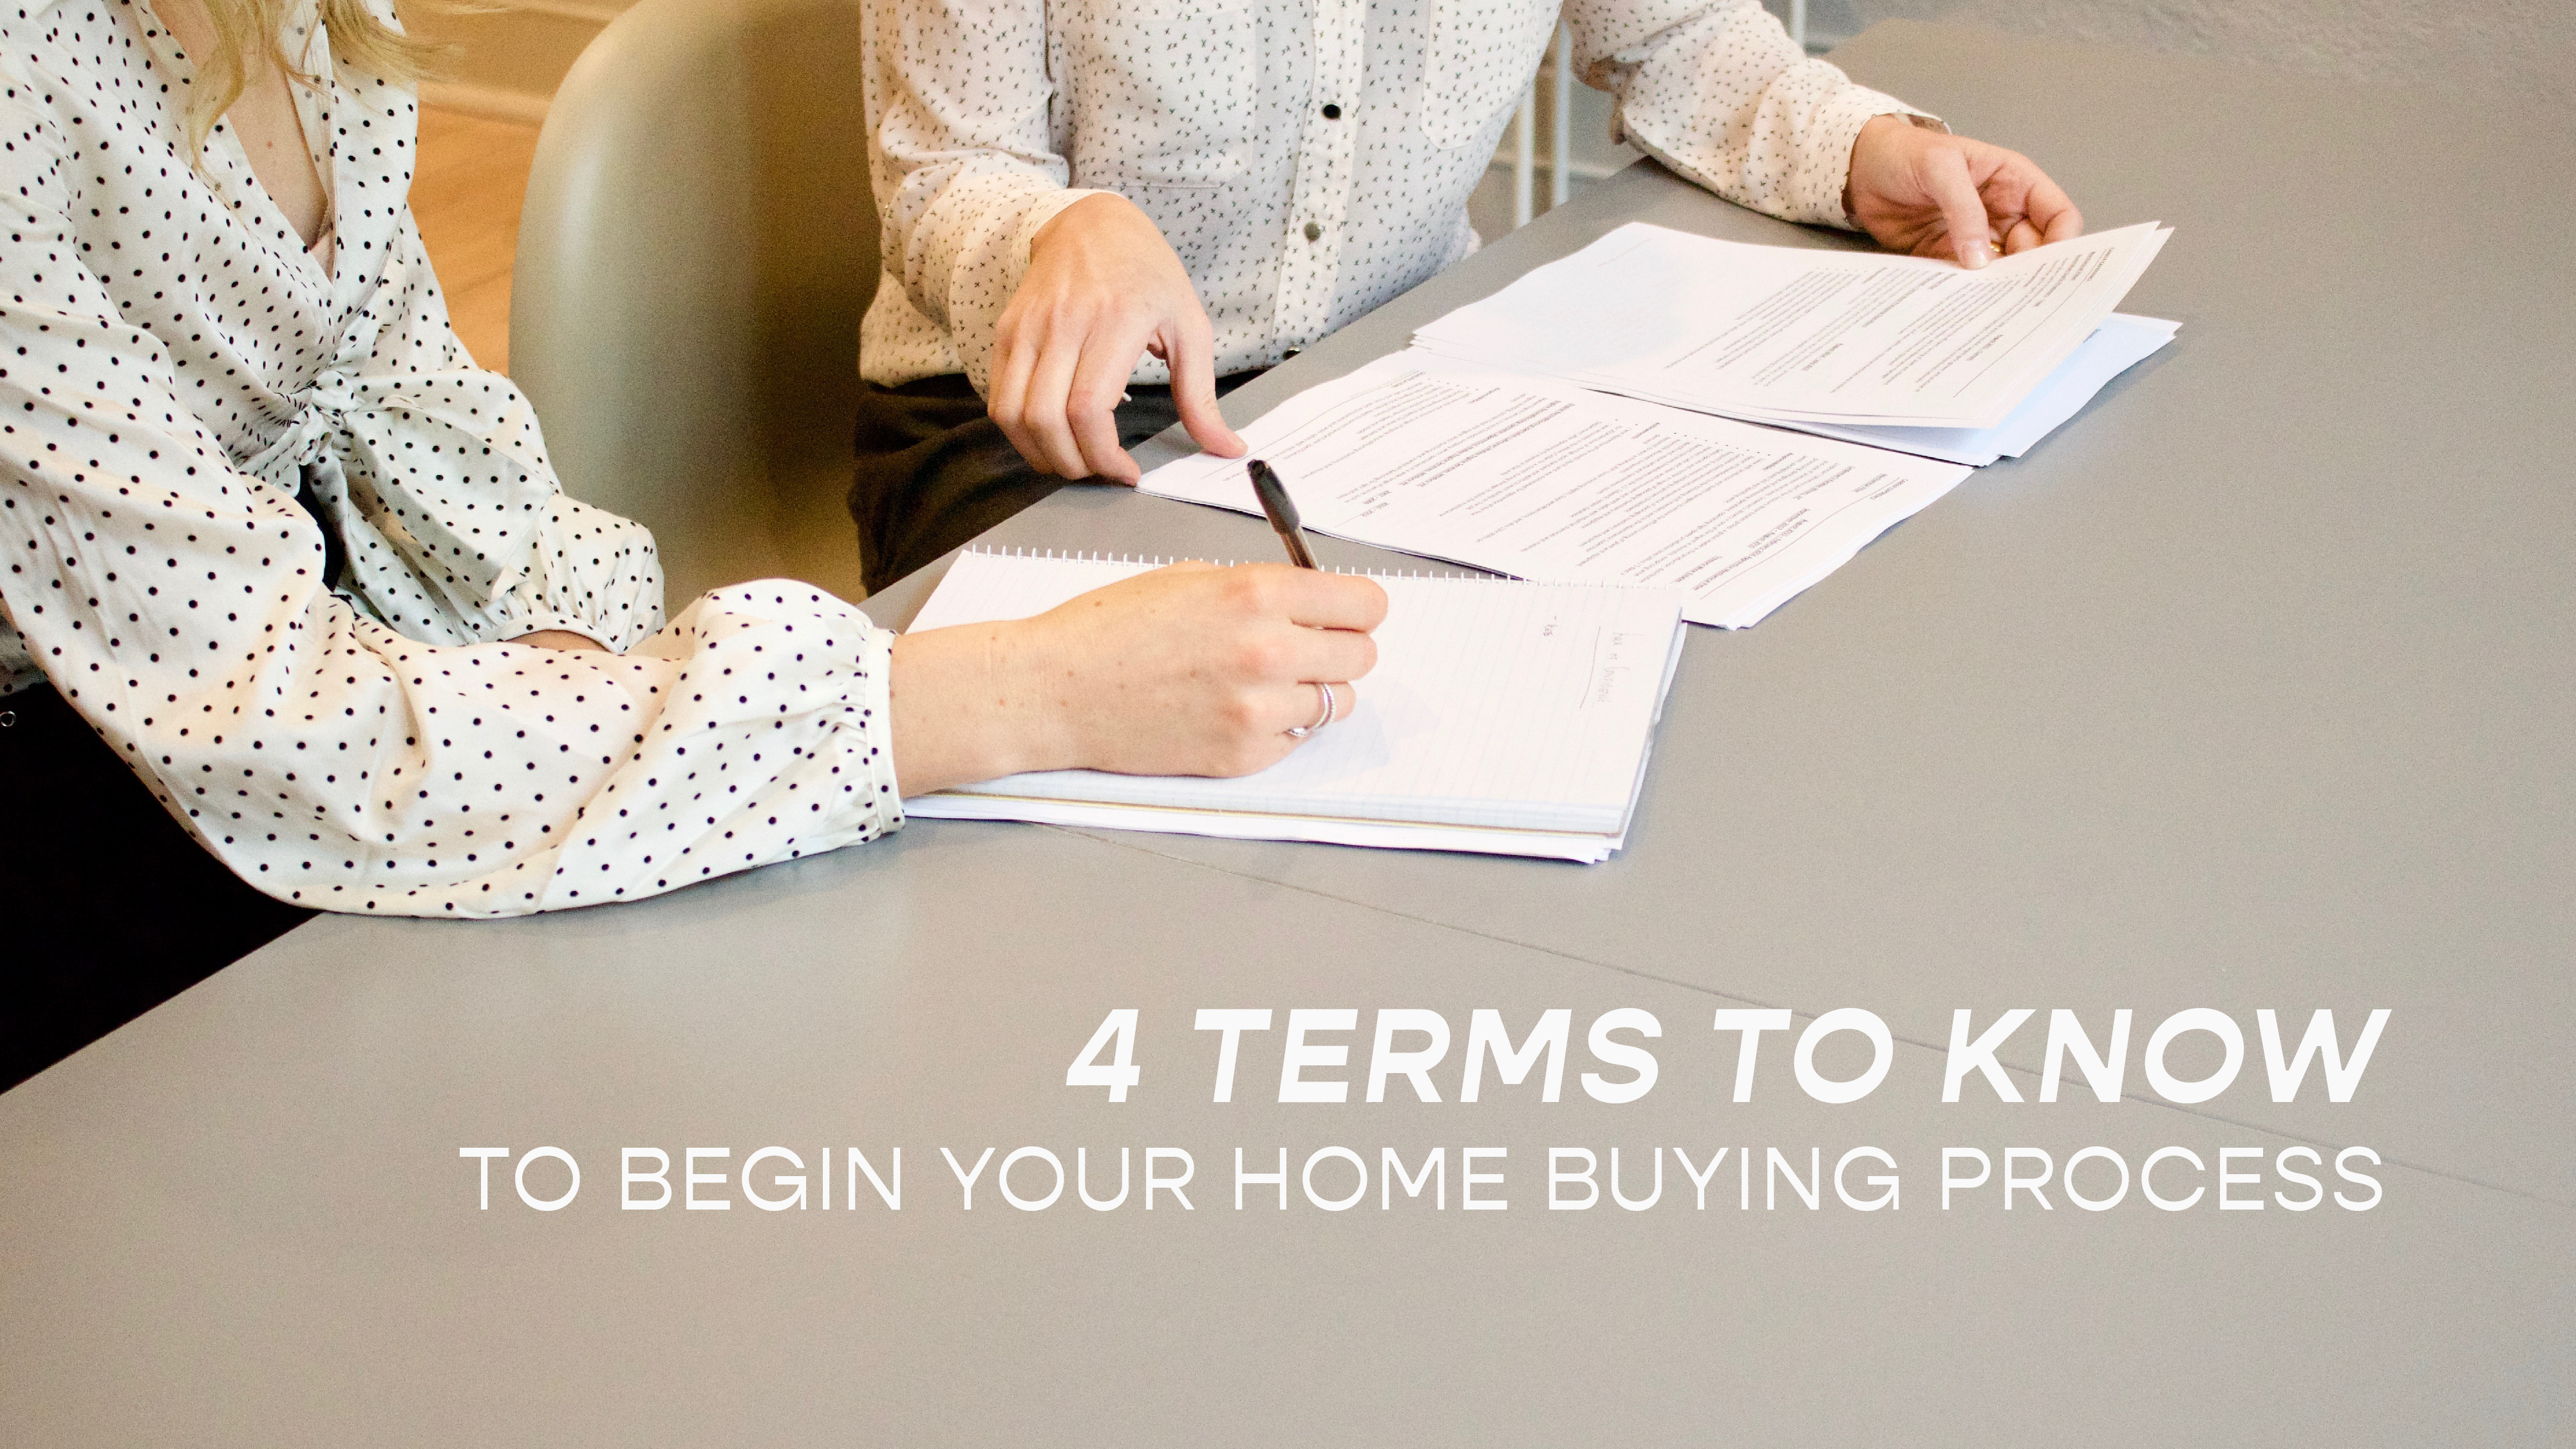 4 Terms to Know to Begin Your Home Buying Process